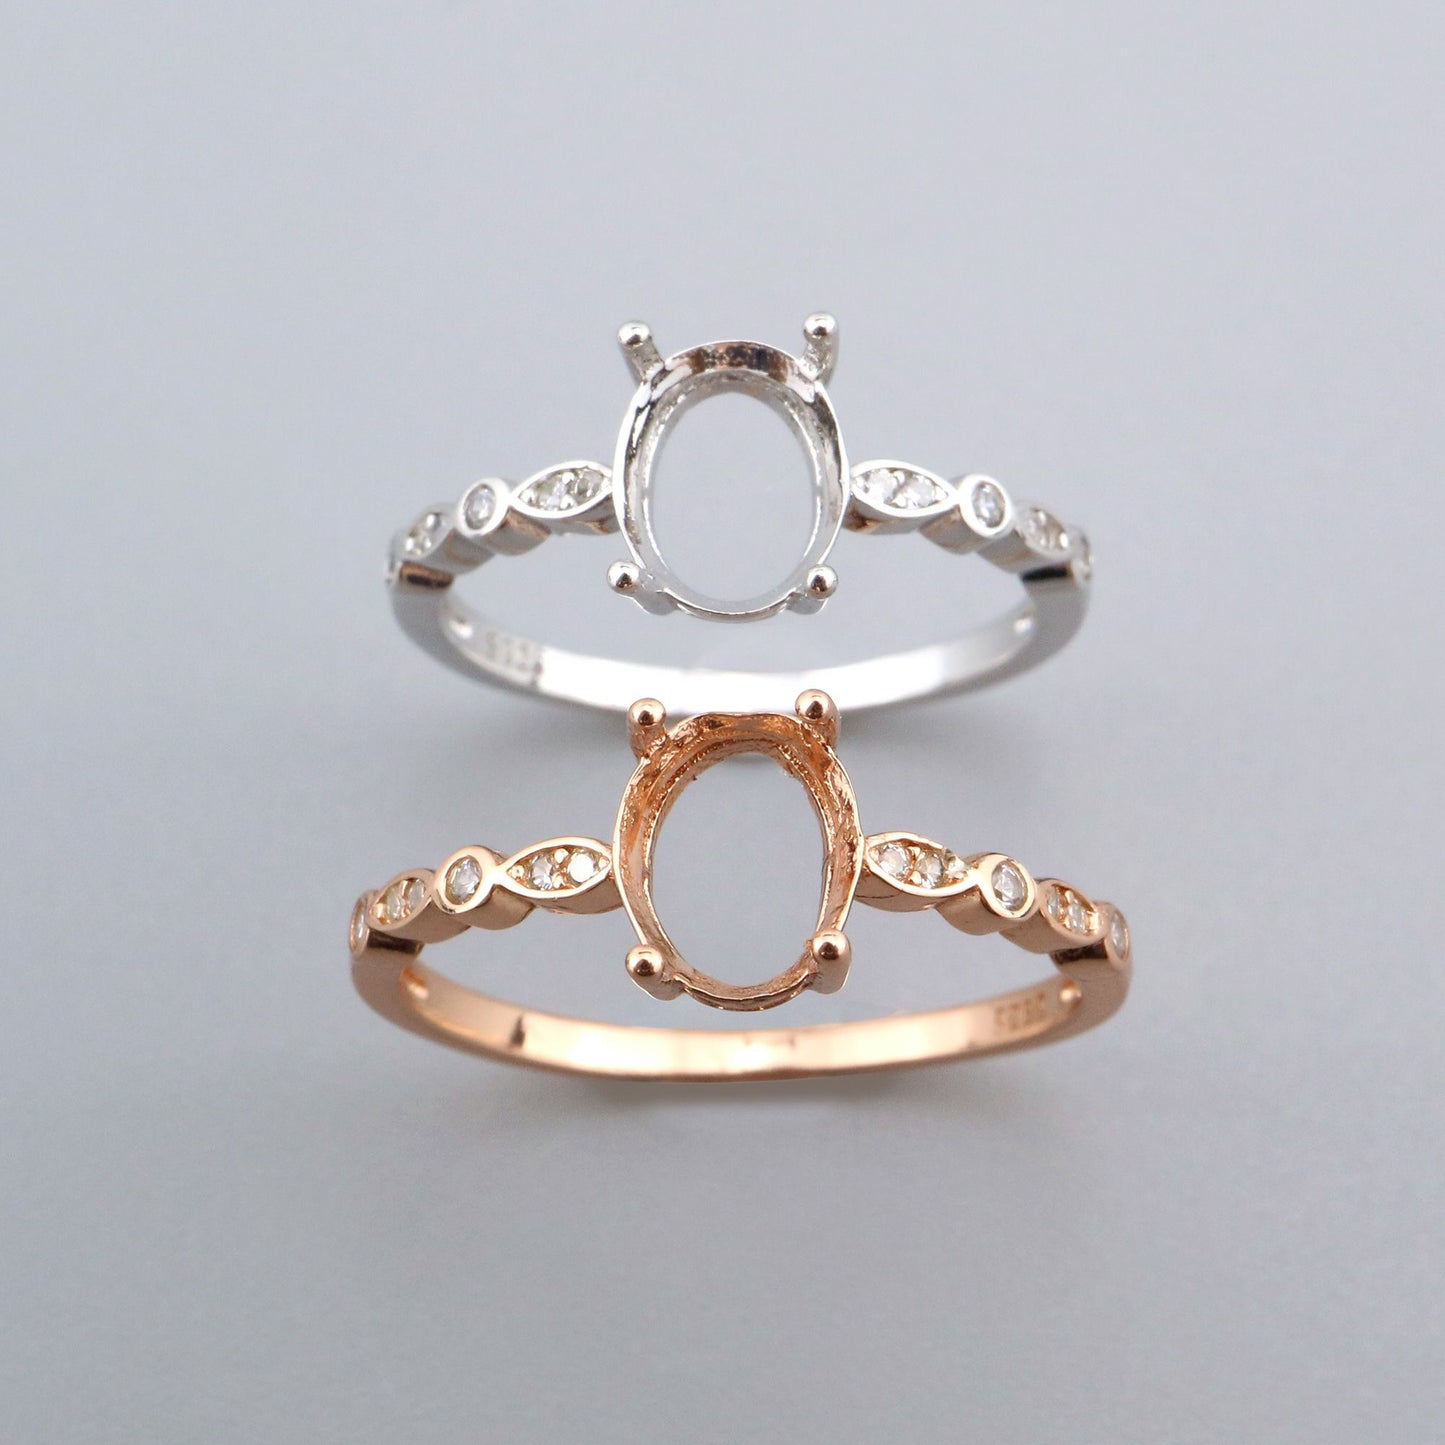 One silver and one rose gold oval art deco vintage settings with alternating bezel marquise and round gems on the sides.